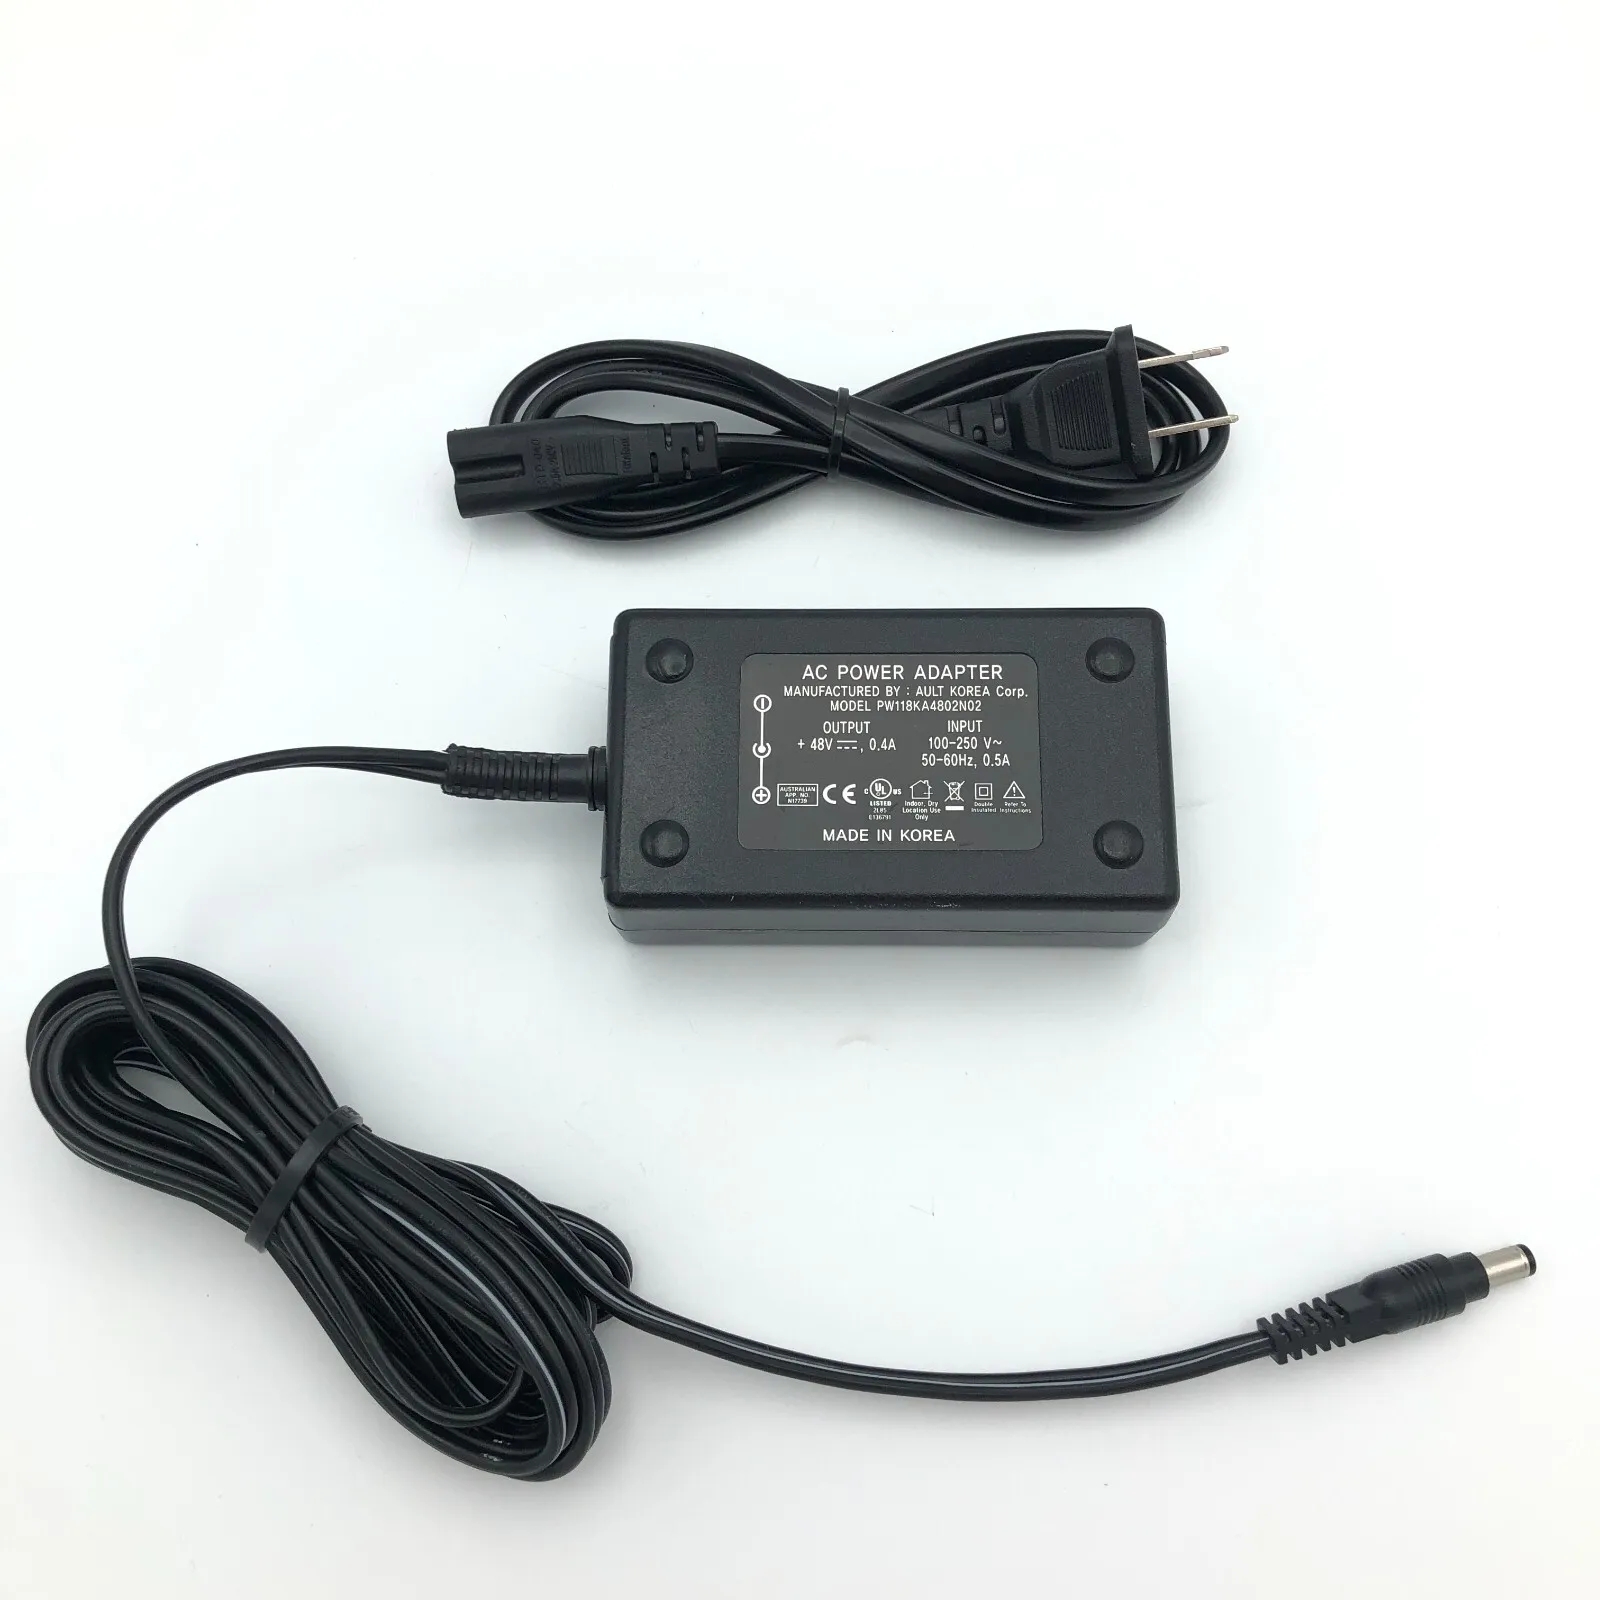 *Brand NEW*Genuine Ault PW118KA4802N02 48V 0.4A AC Adapter 5.5x2.0 mm Power Supply